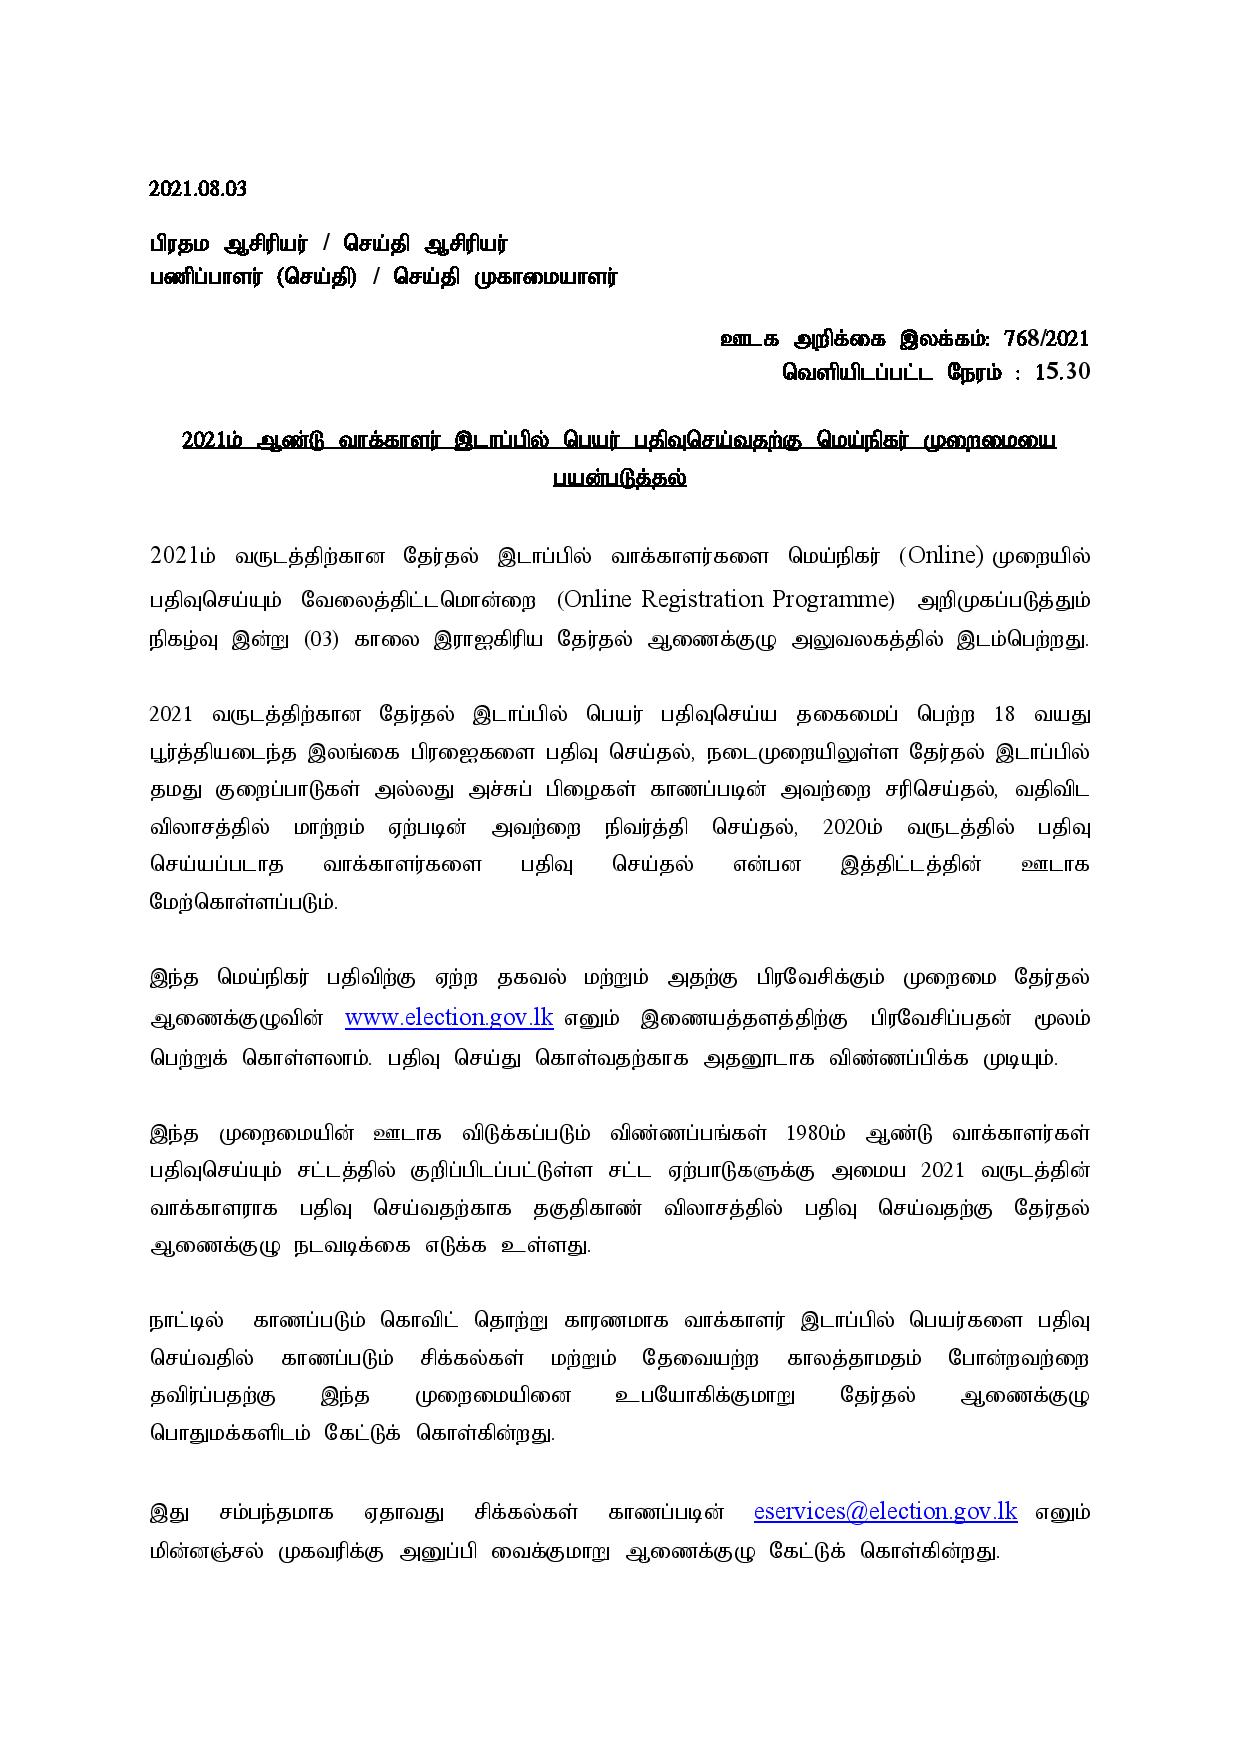 Press Release Tamil page 001